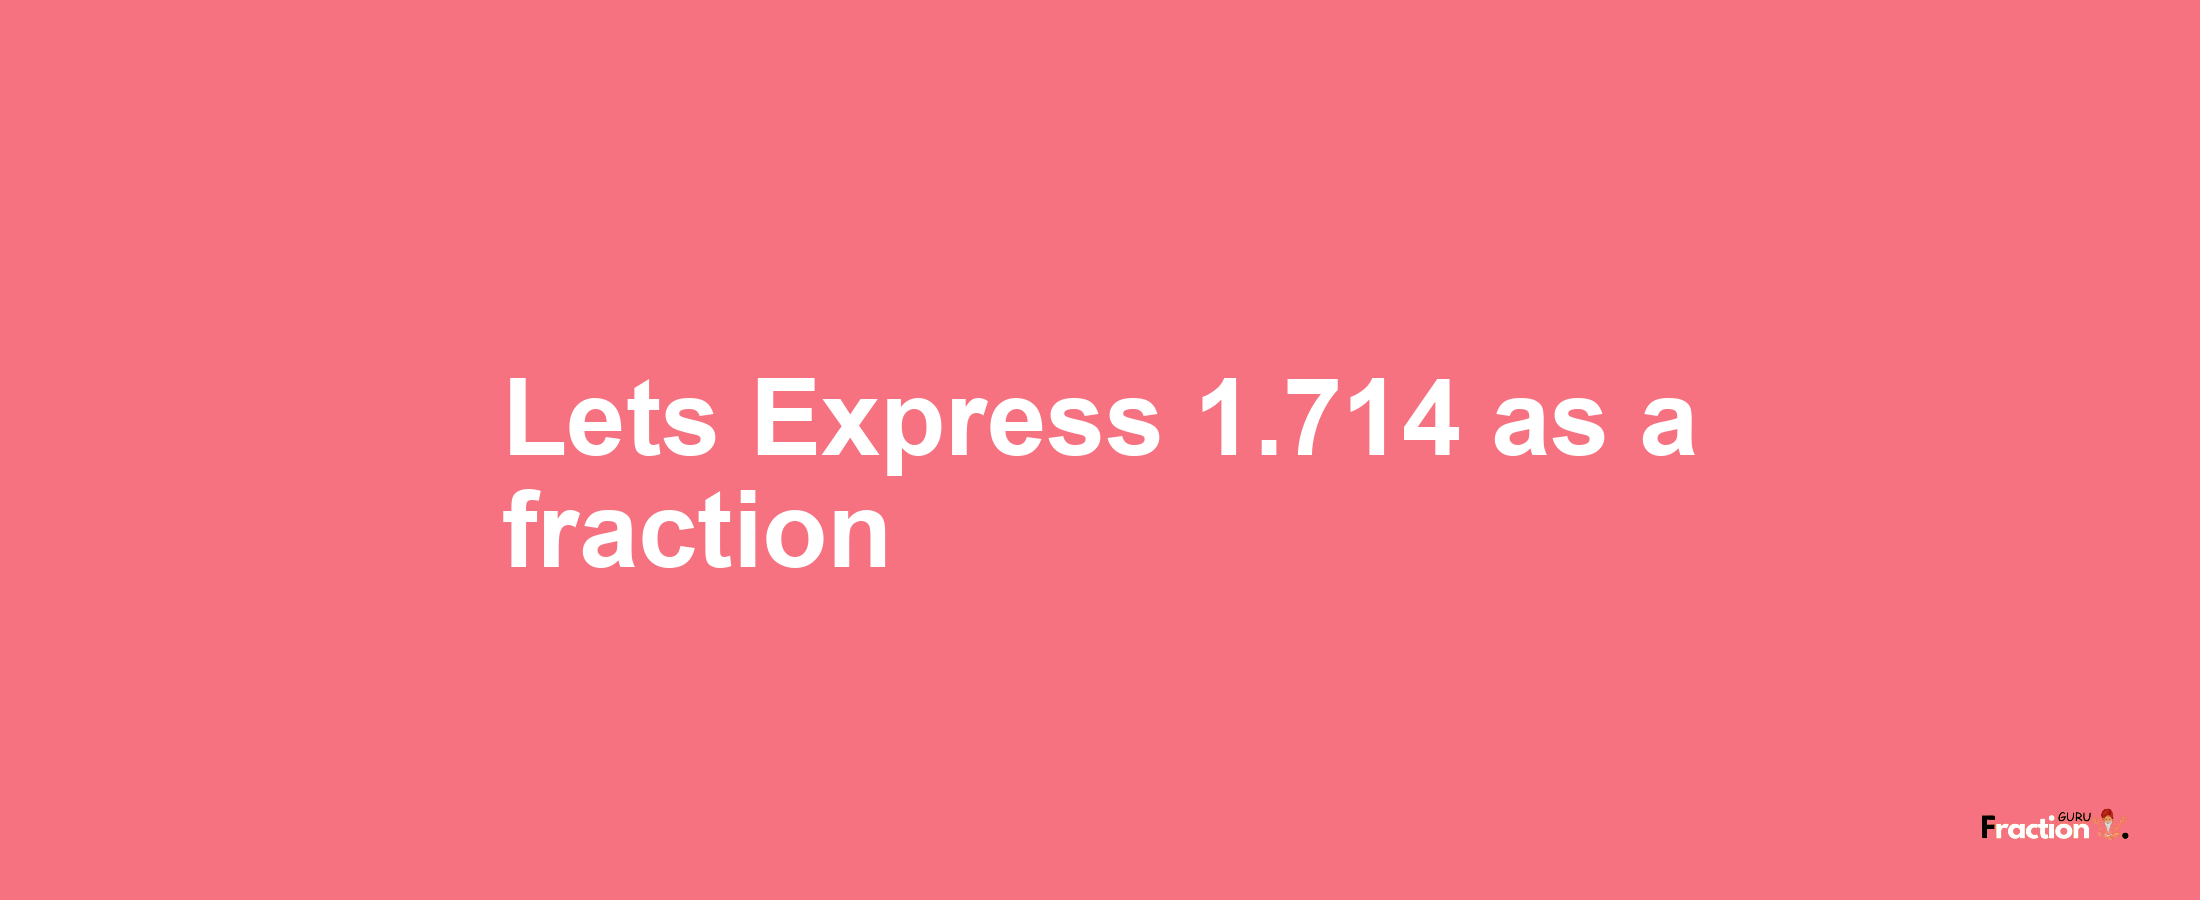 Lets Express 1.714 as afraction